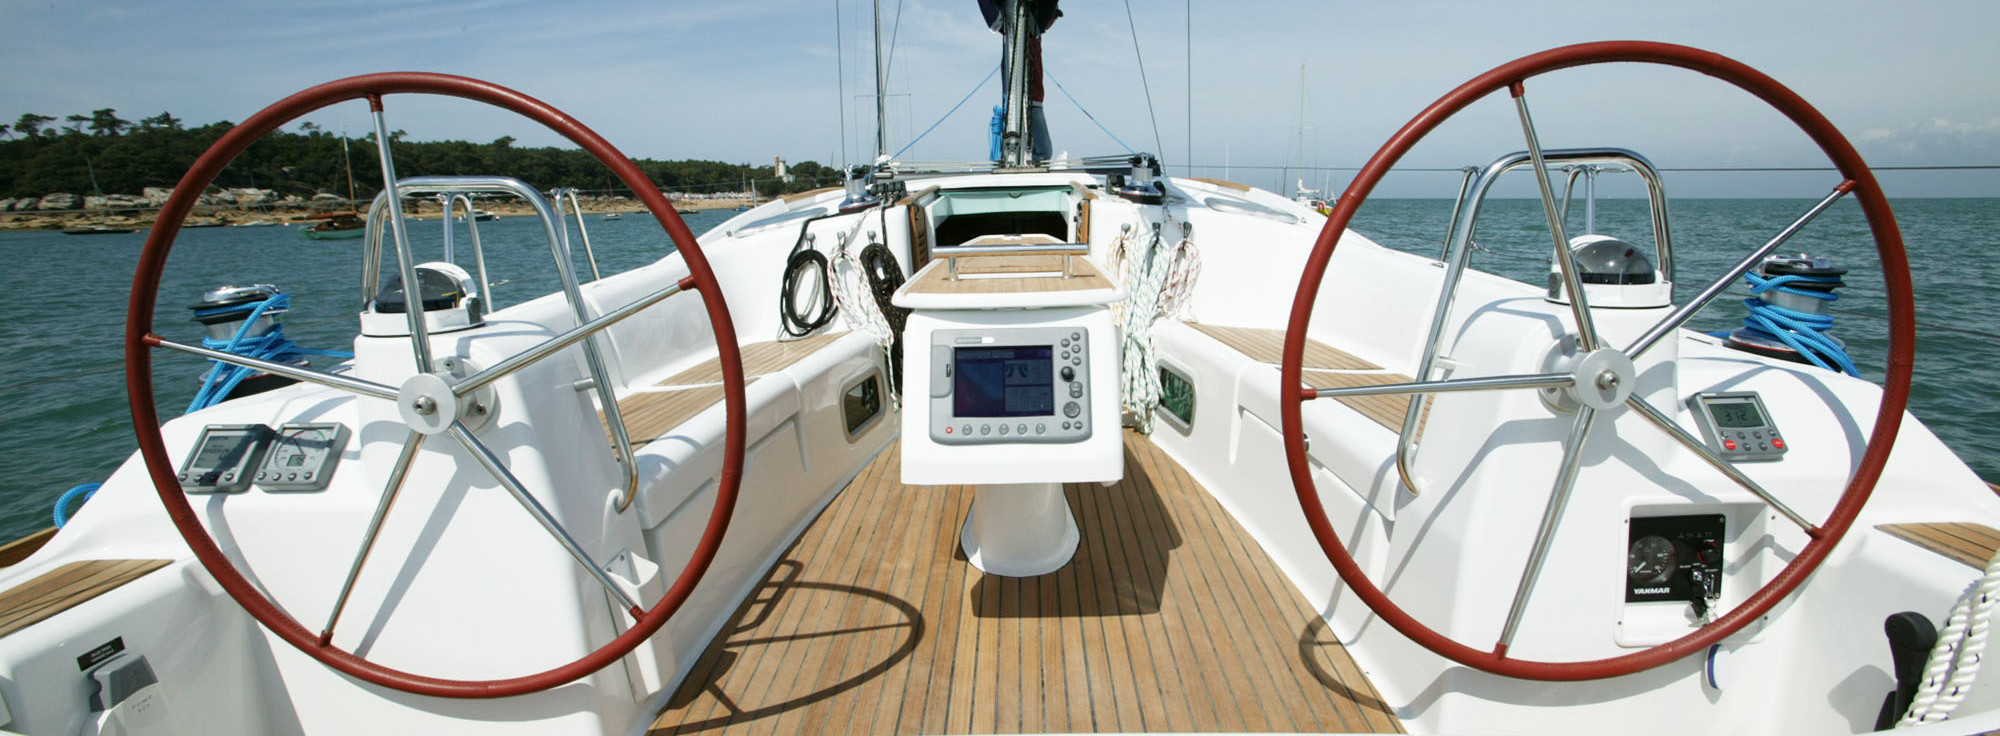 RYA Courses for Professional Yacht Crew